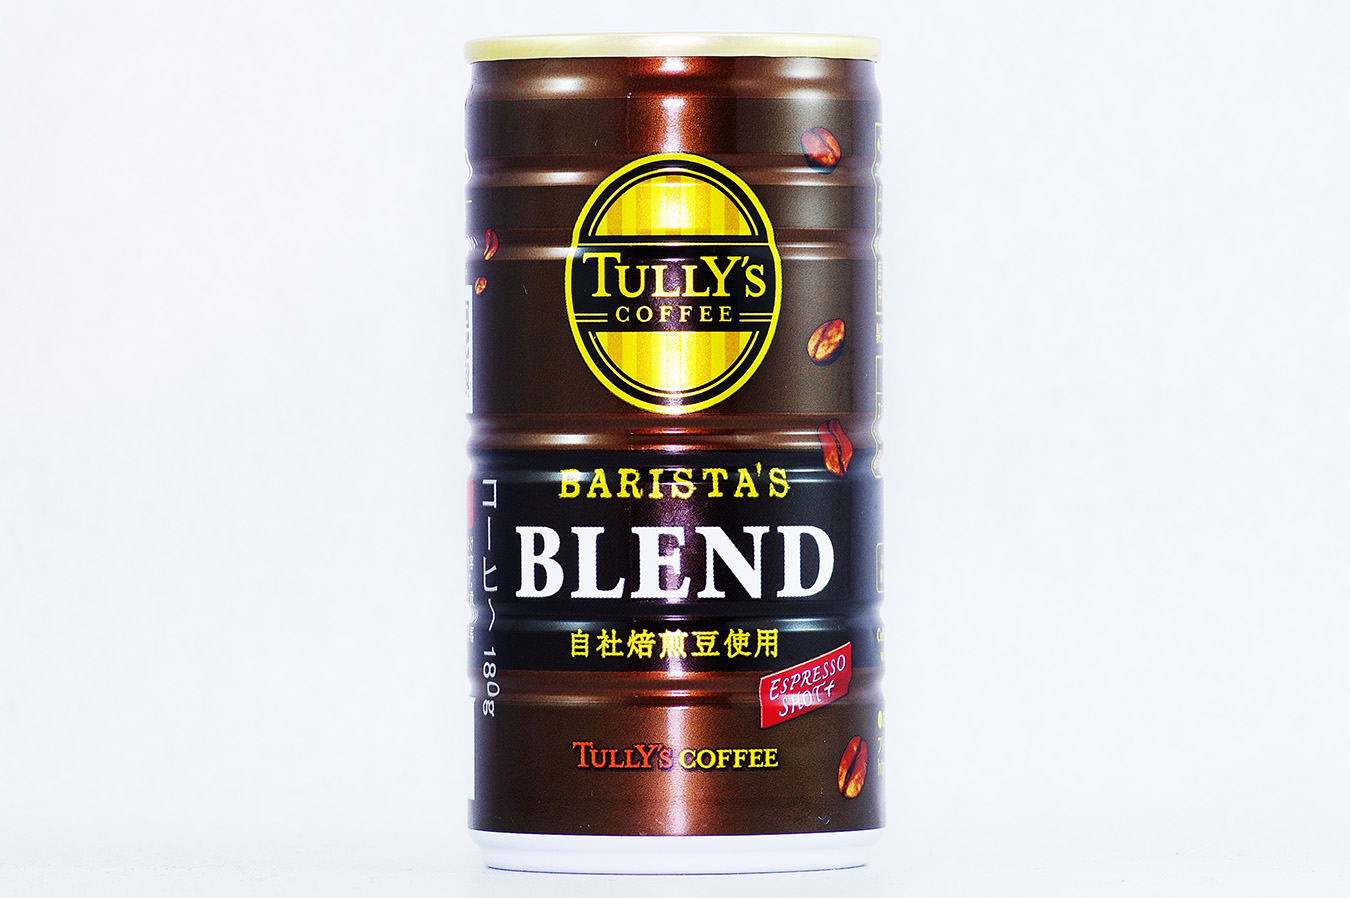 TULLY'S COFFEE BARISTA'S BLEND 2016年